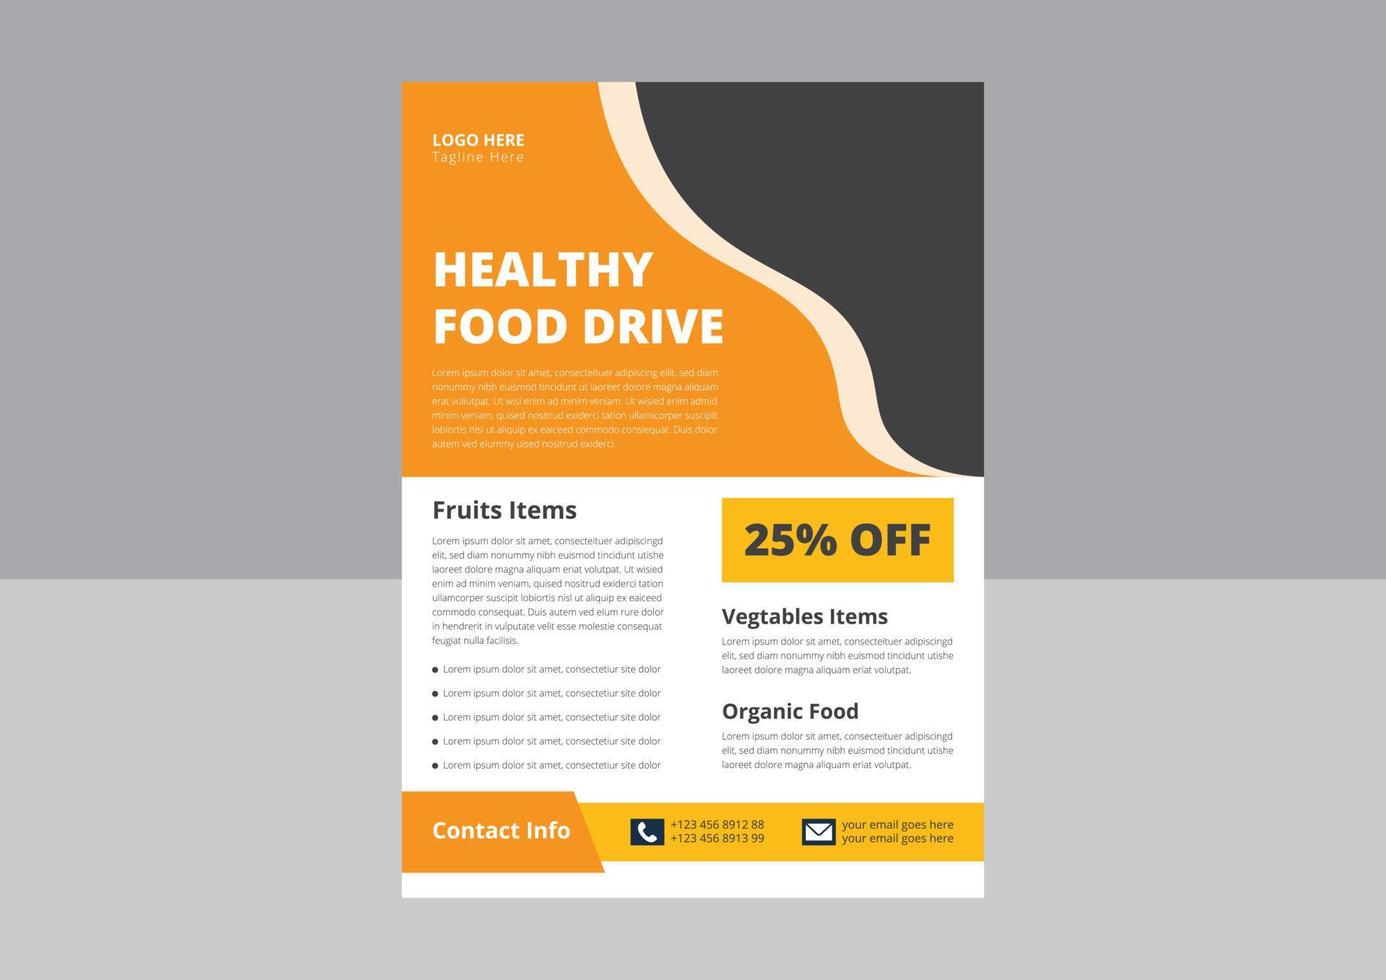 Food Drive Flyer Templates. Food Donation Flyer Design. Charity fundraisers flyer poster template. Cover, leaflet, flyer design. vector